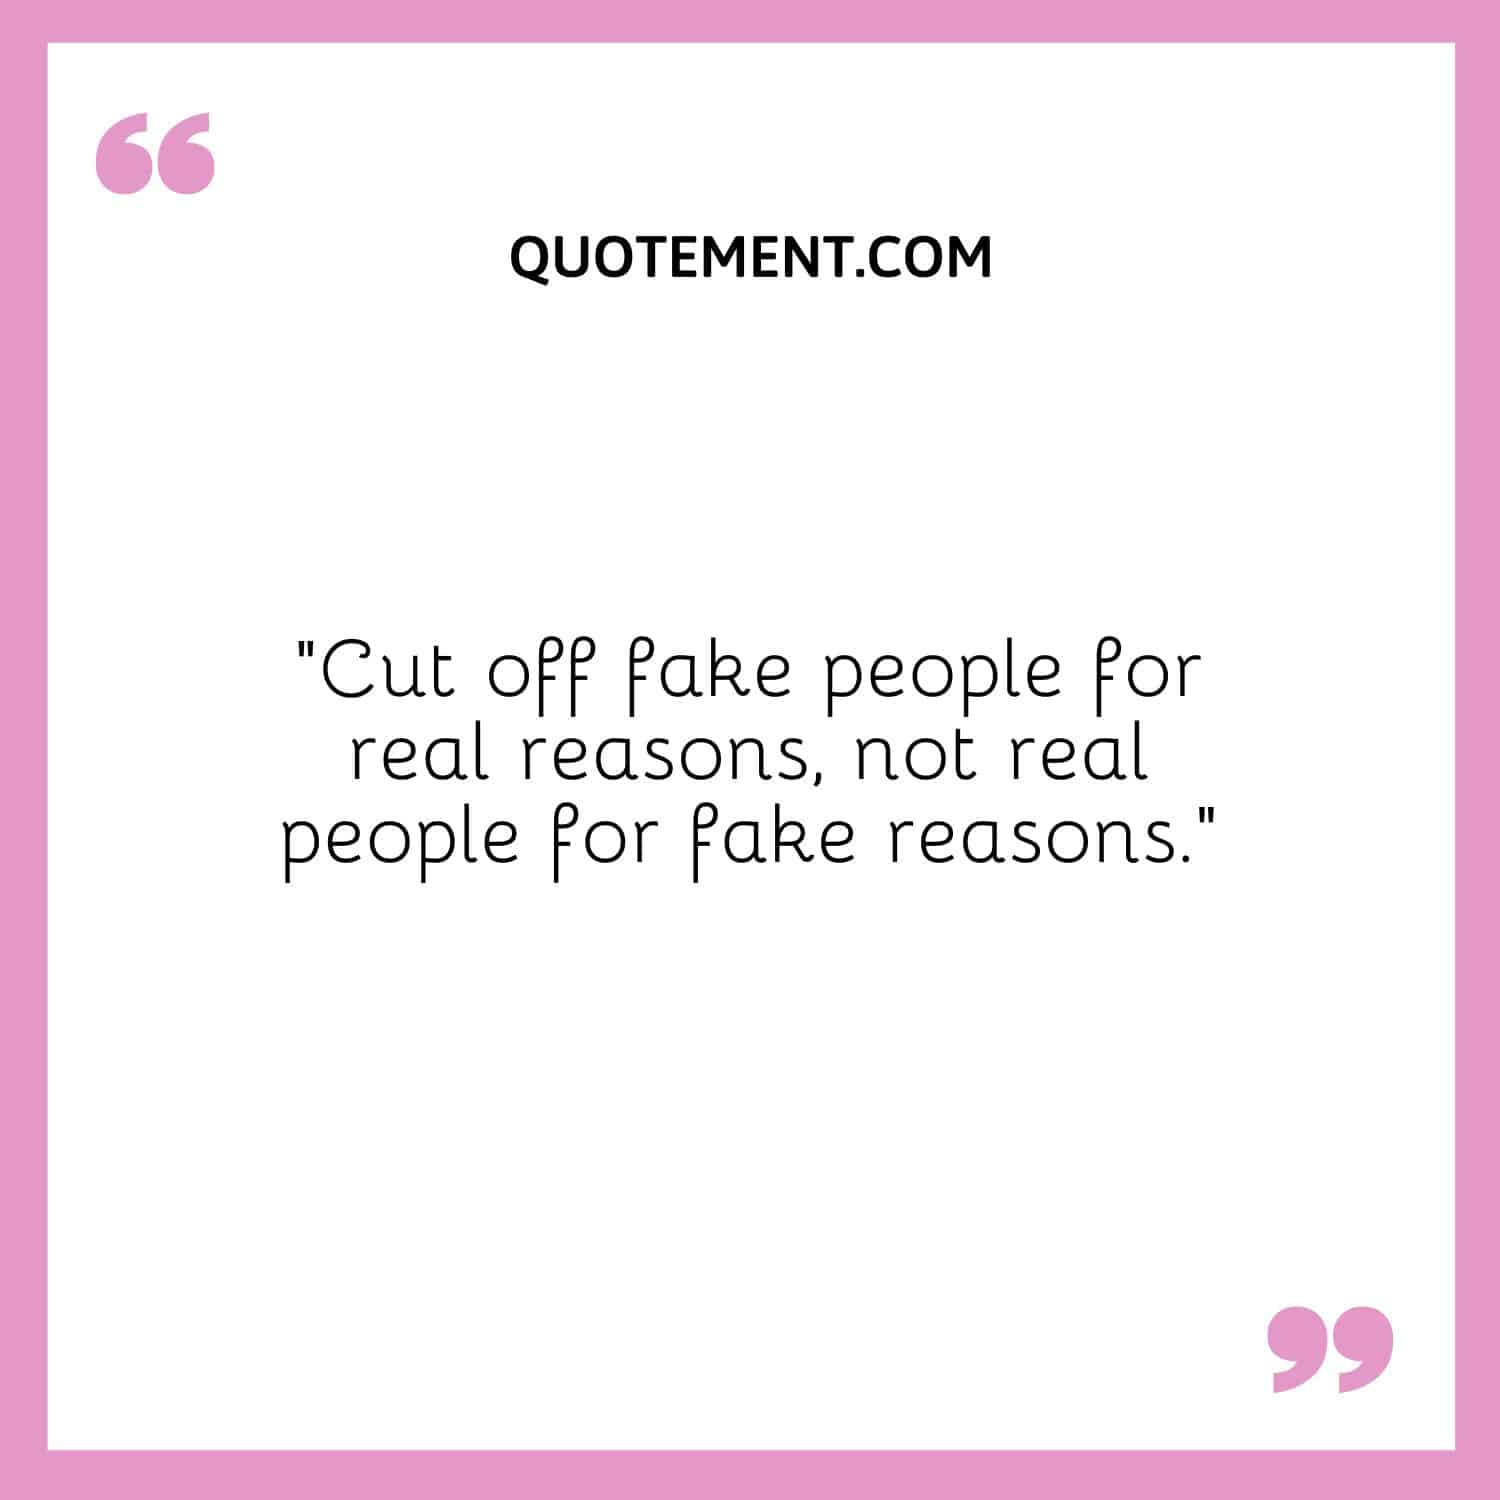 “Cut off fake people for real reasons, not real people for fake reasons.”